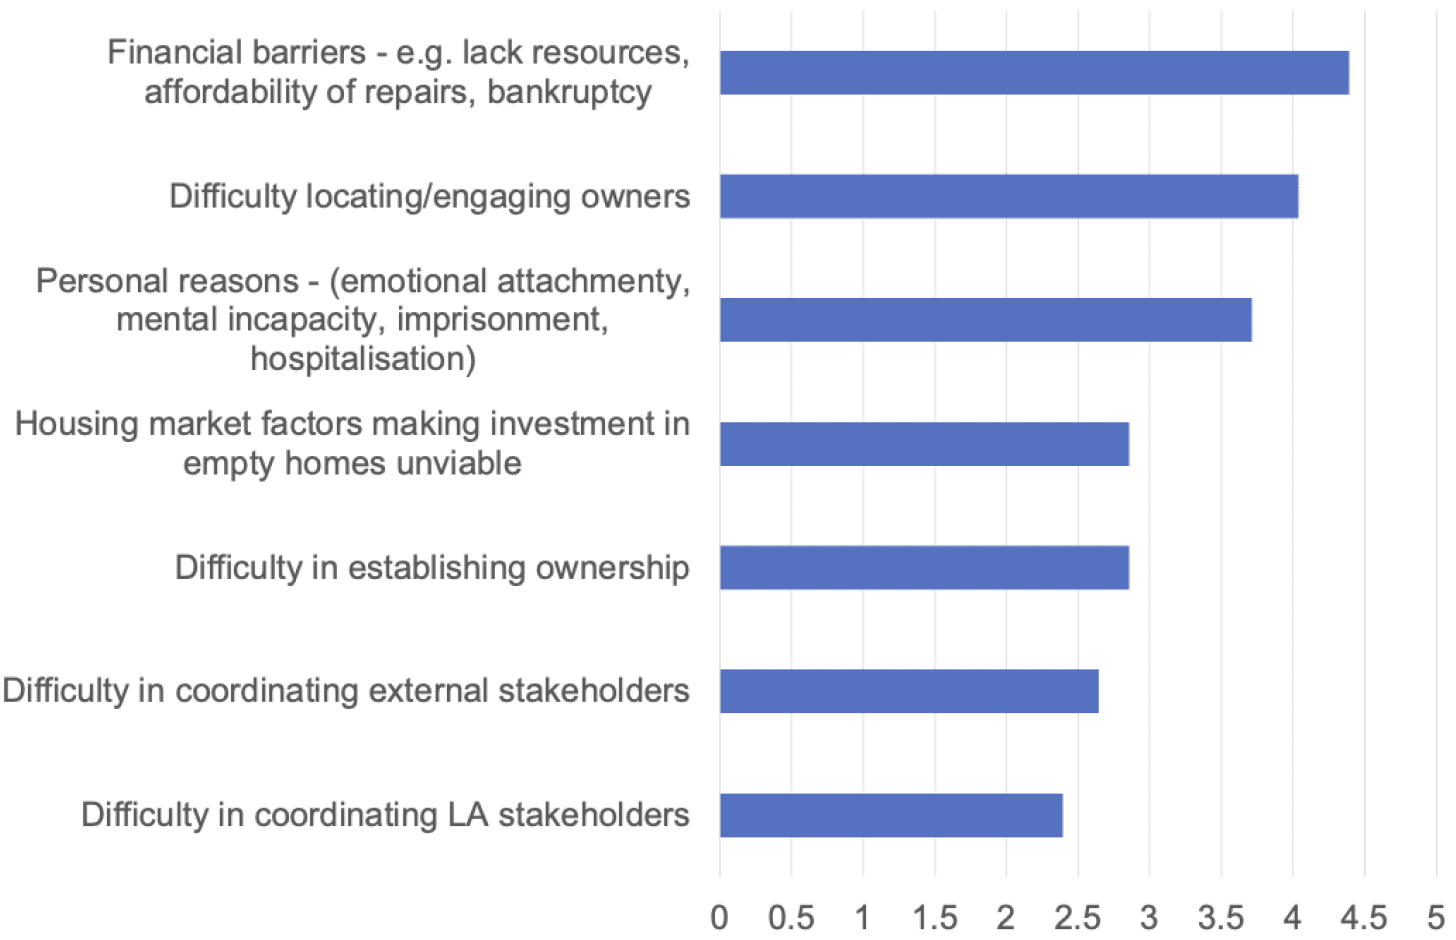 A horizontal bar chart showing the barriers to bringing homes back into use. The factors are scored from 1 = no impact at all to 5 = a significant impact. The chart presents the average score for each of the seven factors, with financial barriers receiving the highest average score and difficulty in coordinating local authority stakeholders scoring the lowest.